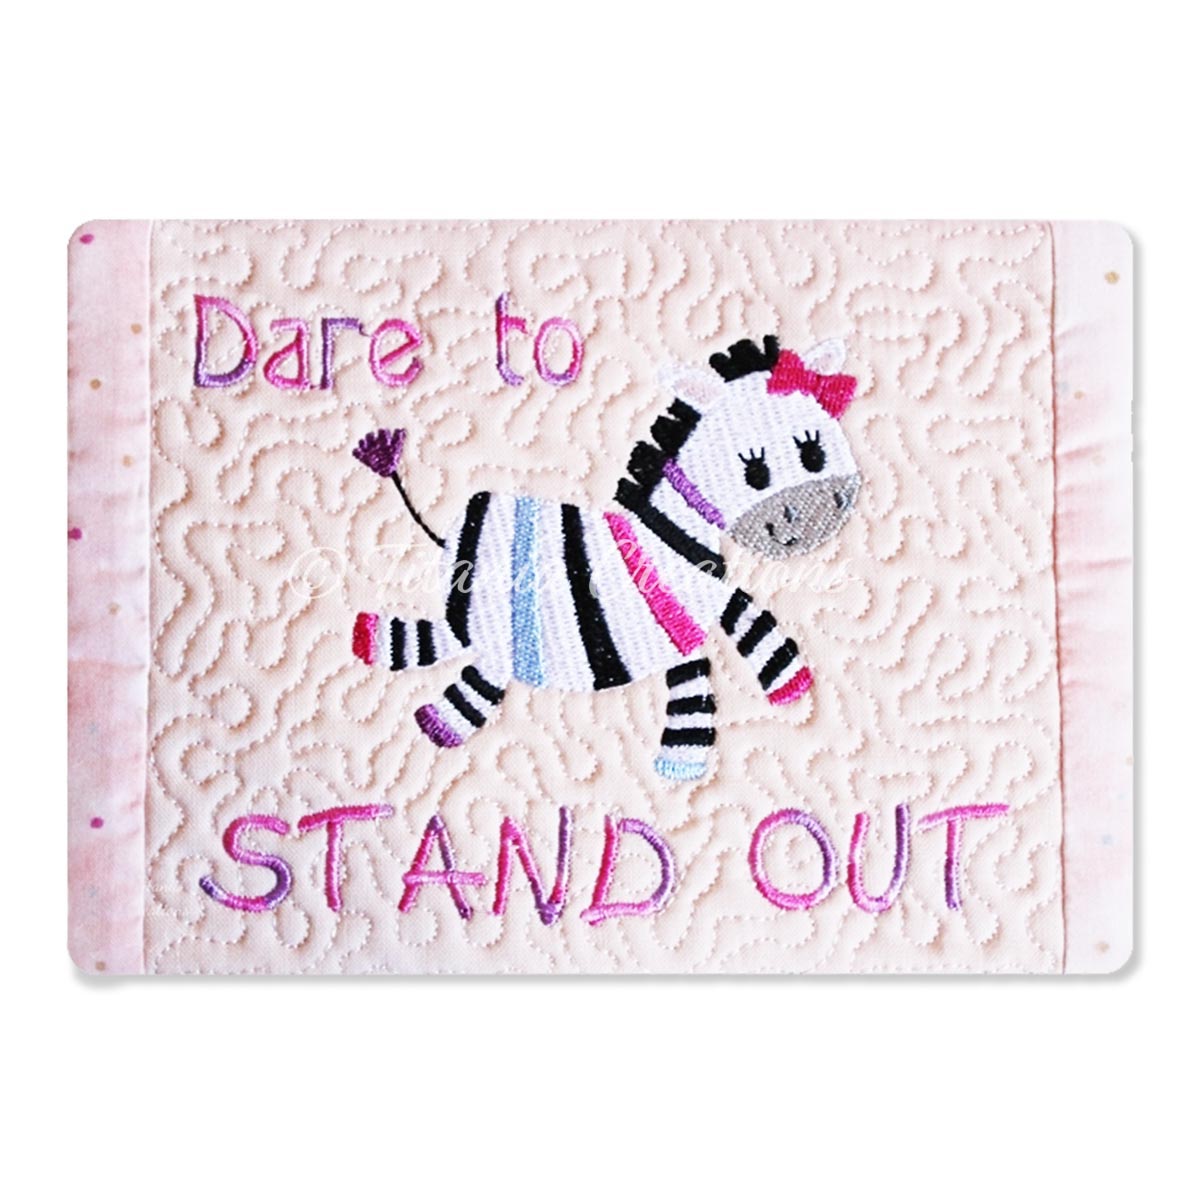 ITH Dare To Stand Out Mug Rug 5x7